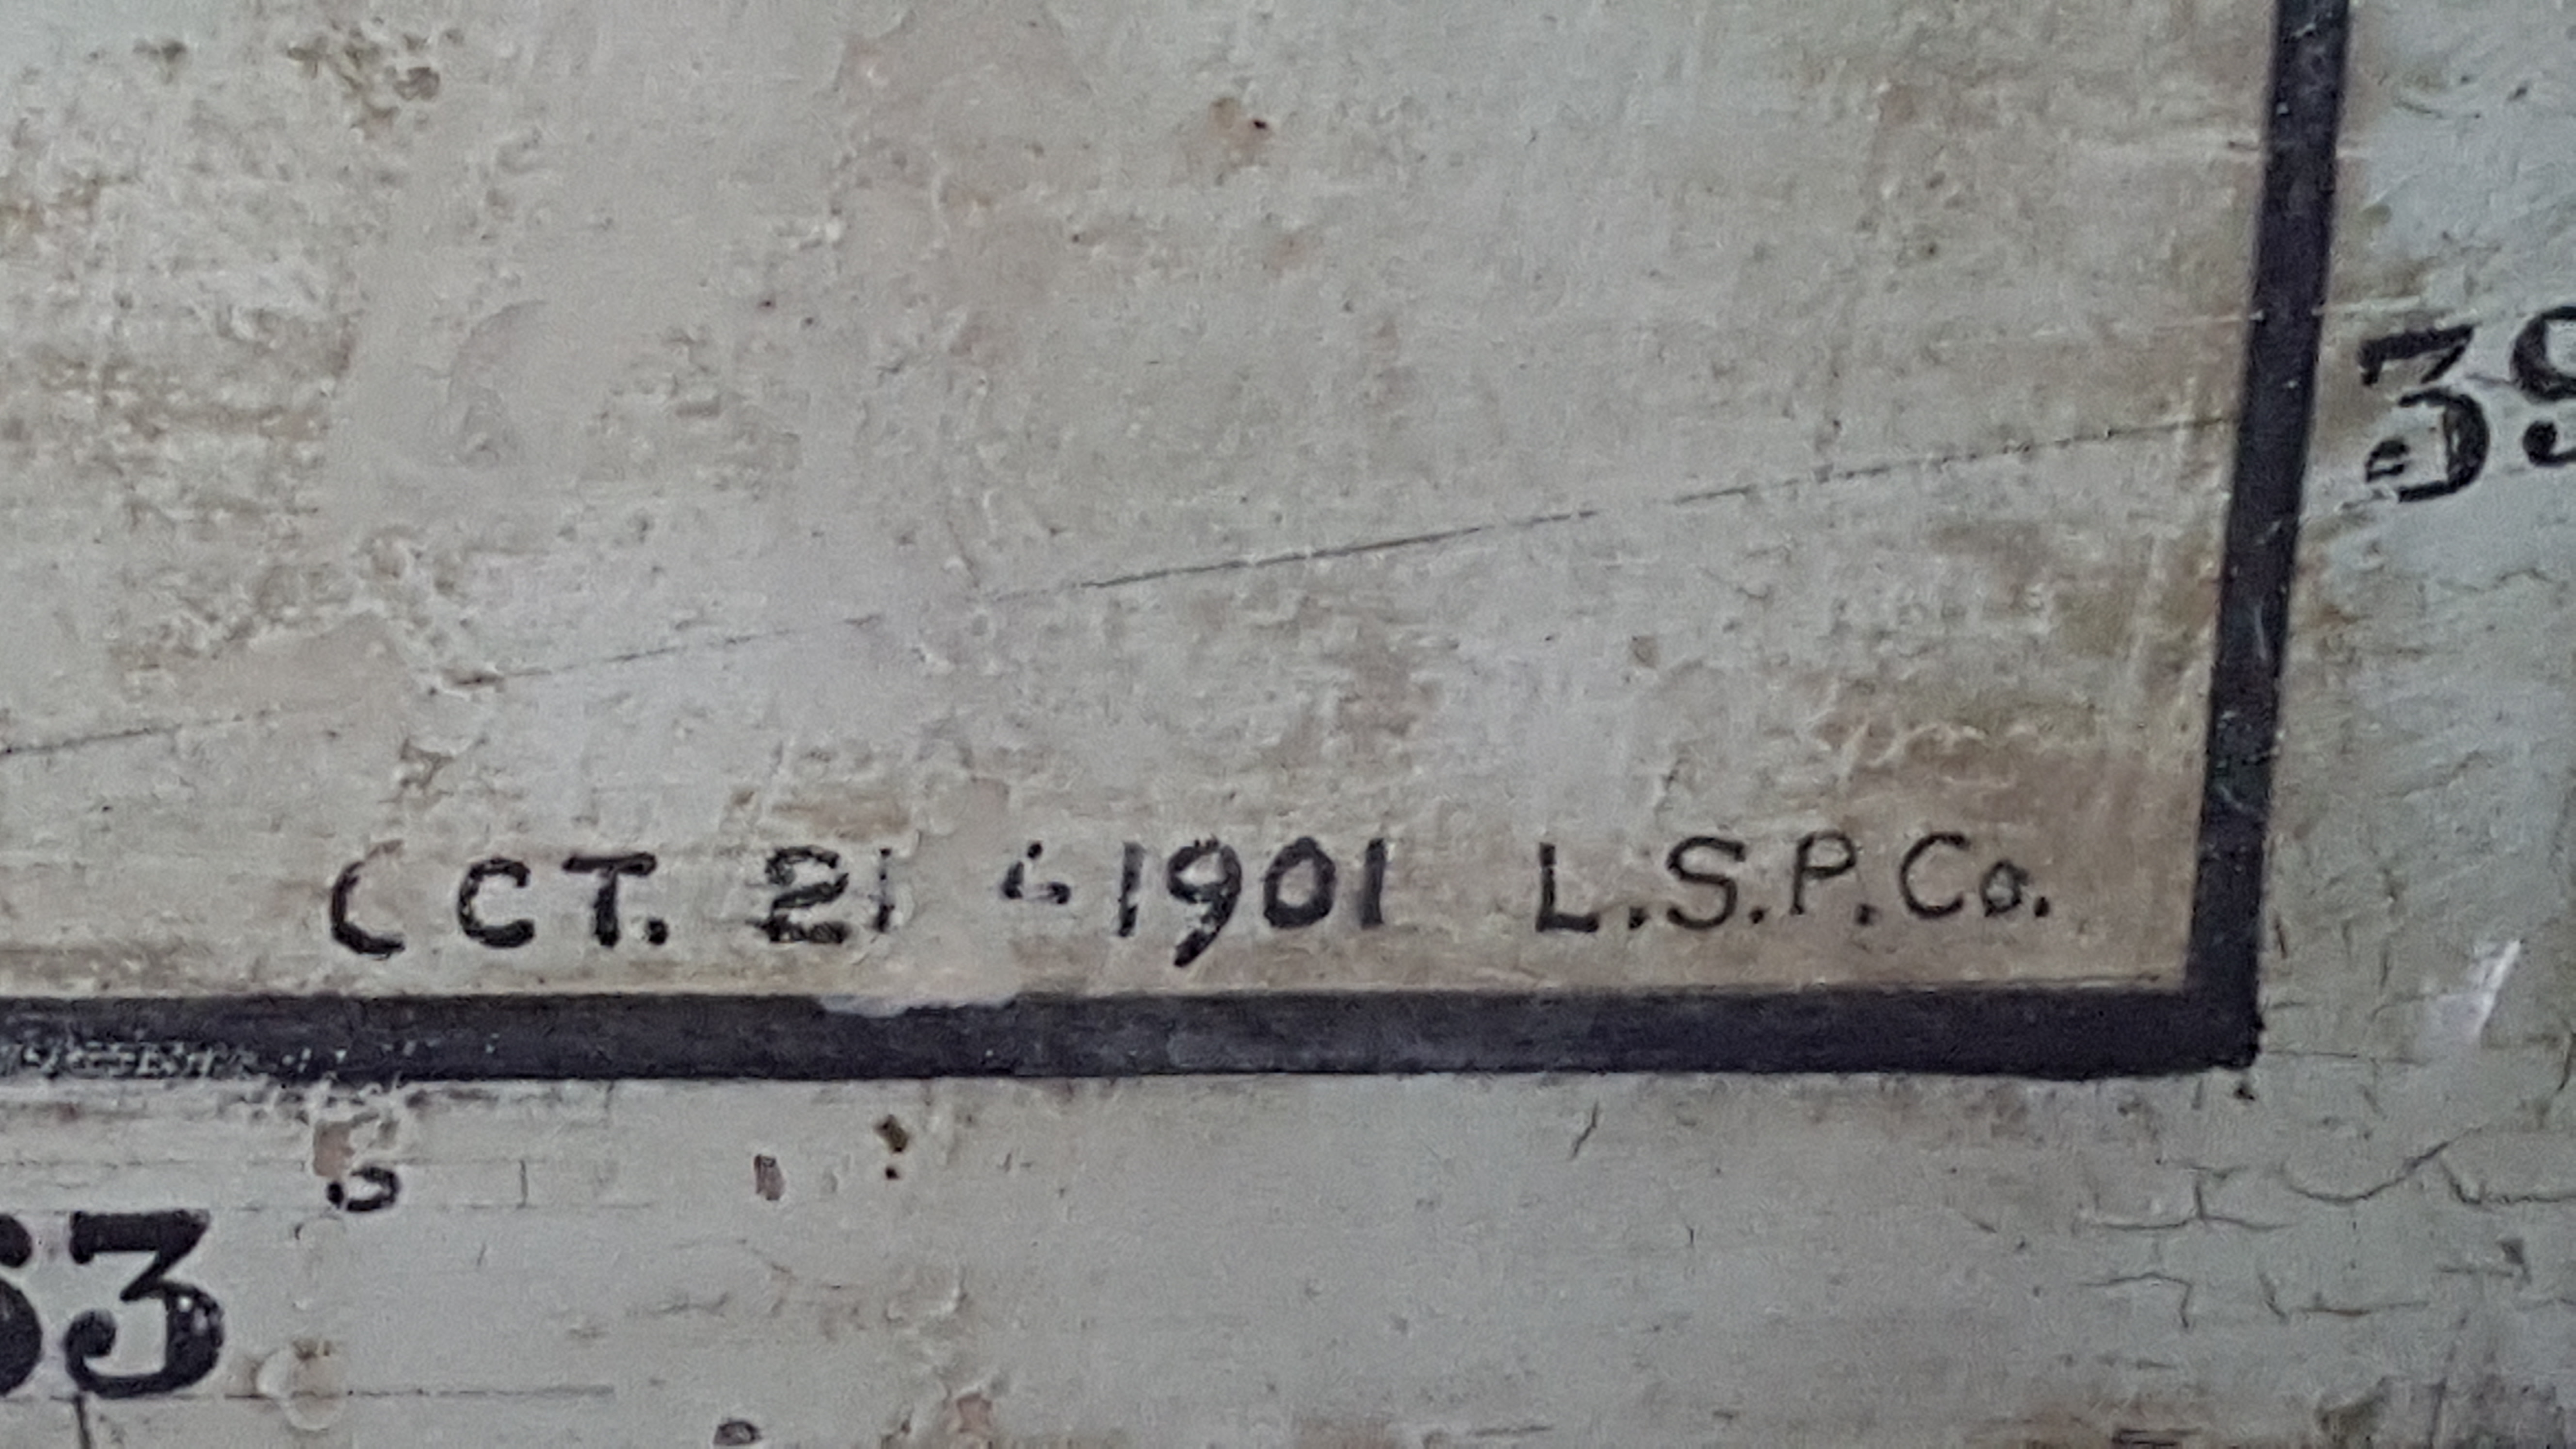 Photograph of the corner of Clergue's wall map. Partial longitude and latitude numbers visible as well as date it was drawn, 1901.